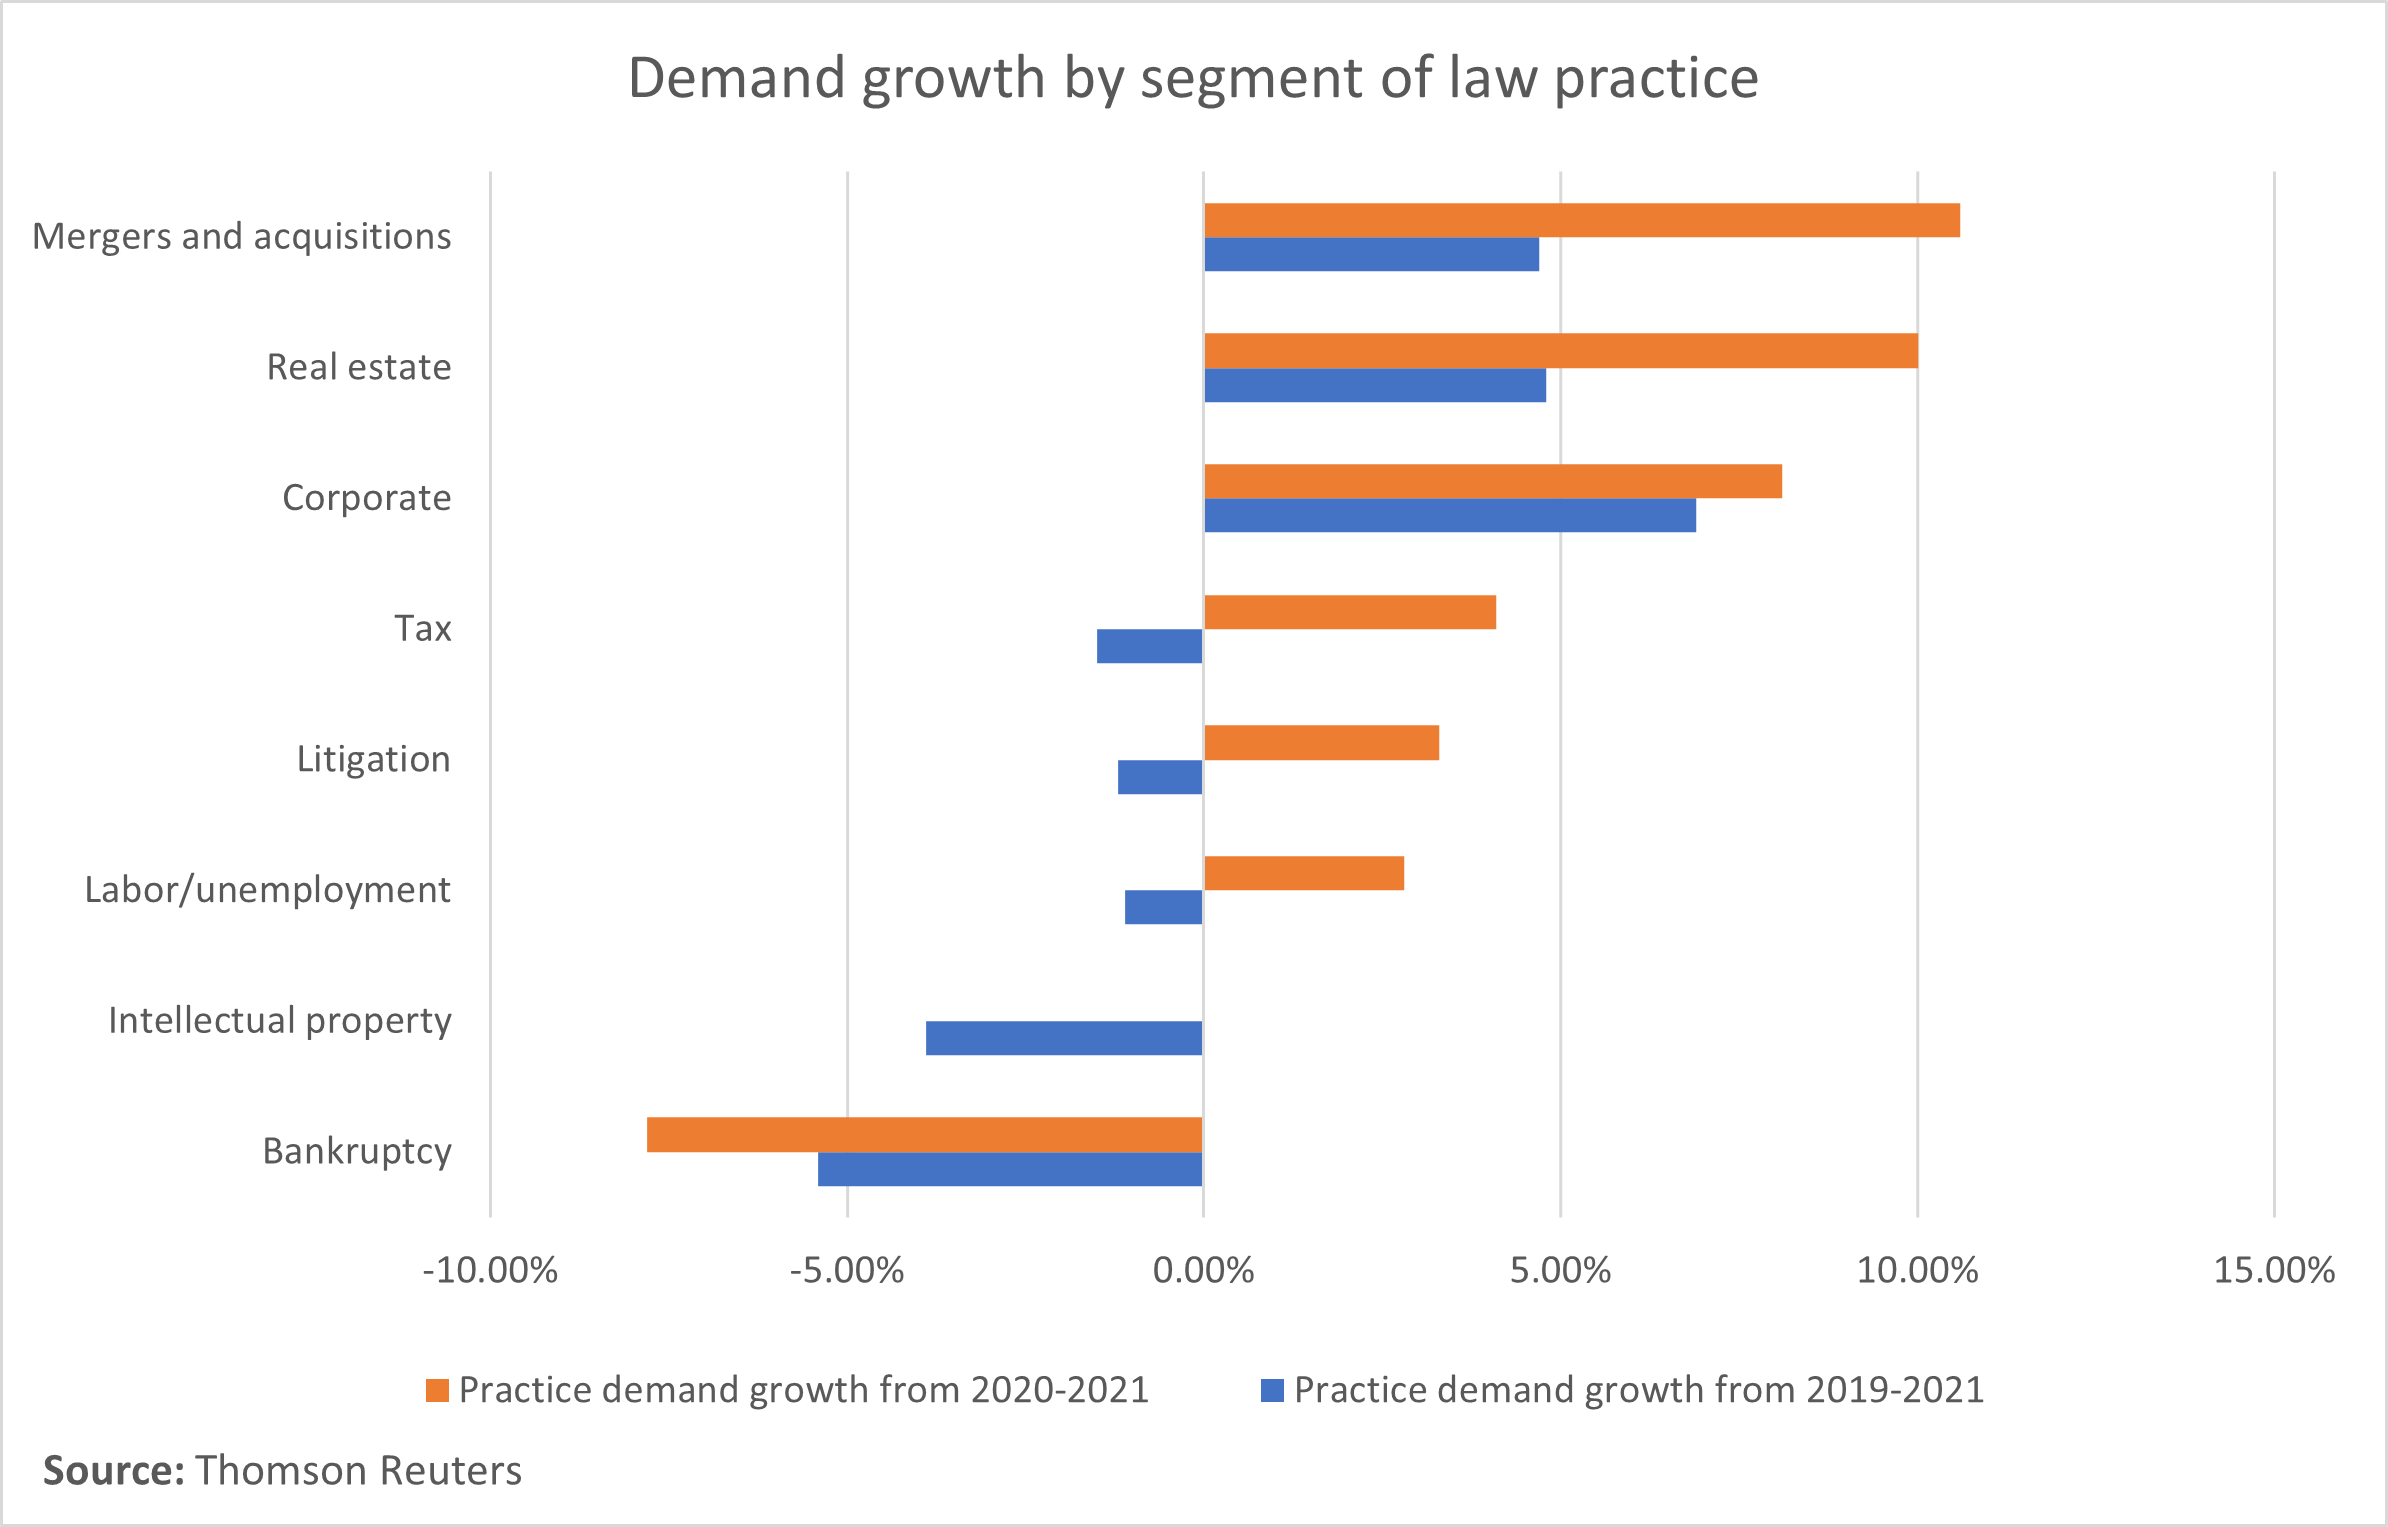 A bar graph comparing how demand for law firm services has grown or decreased by segment since 2020 vs. since 2019